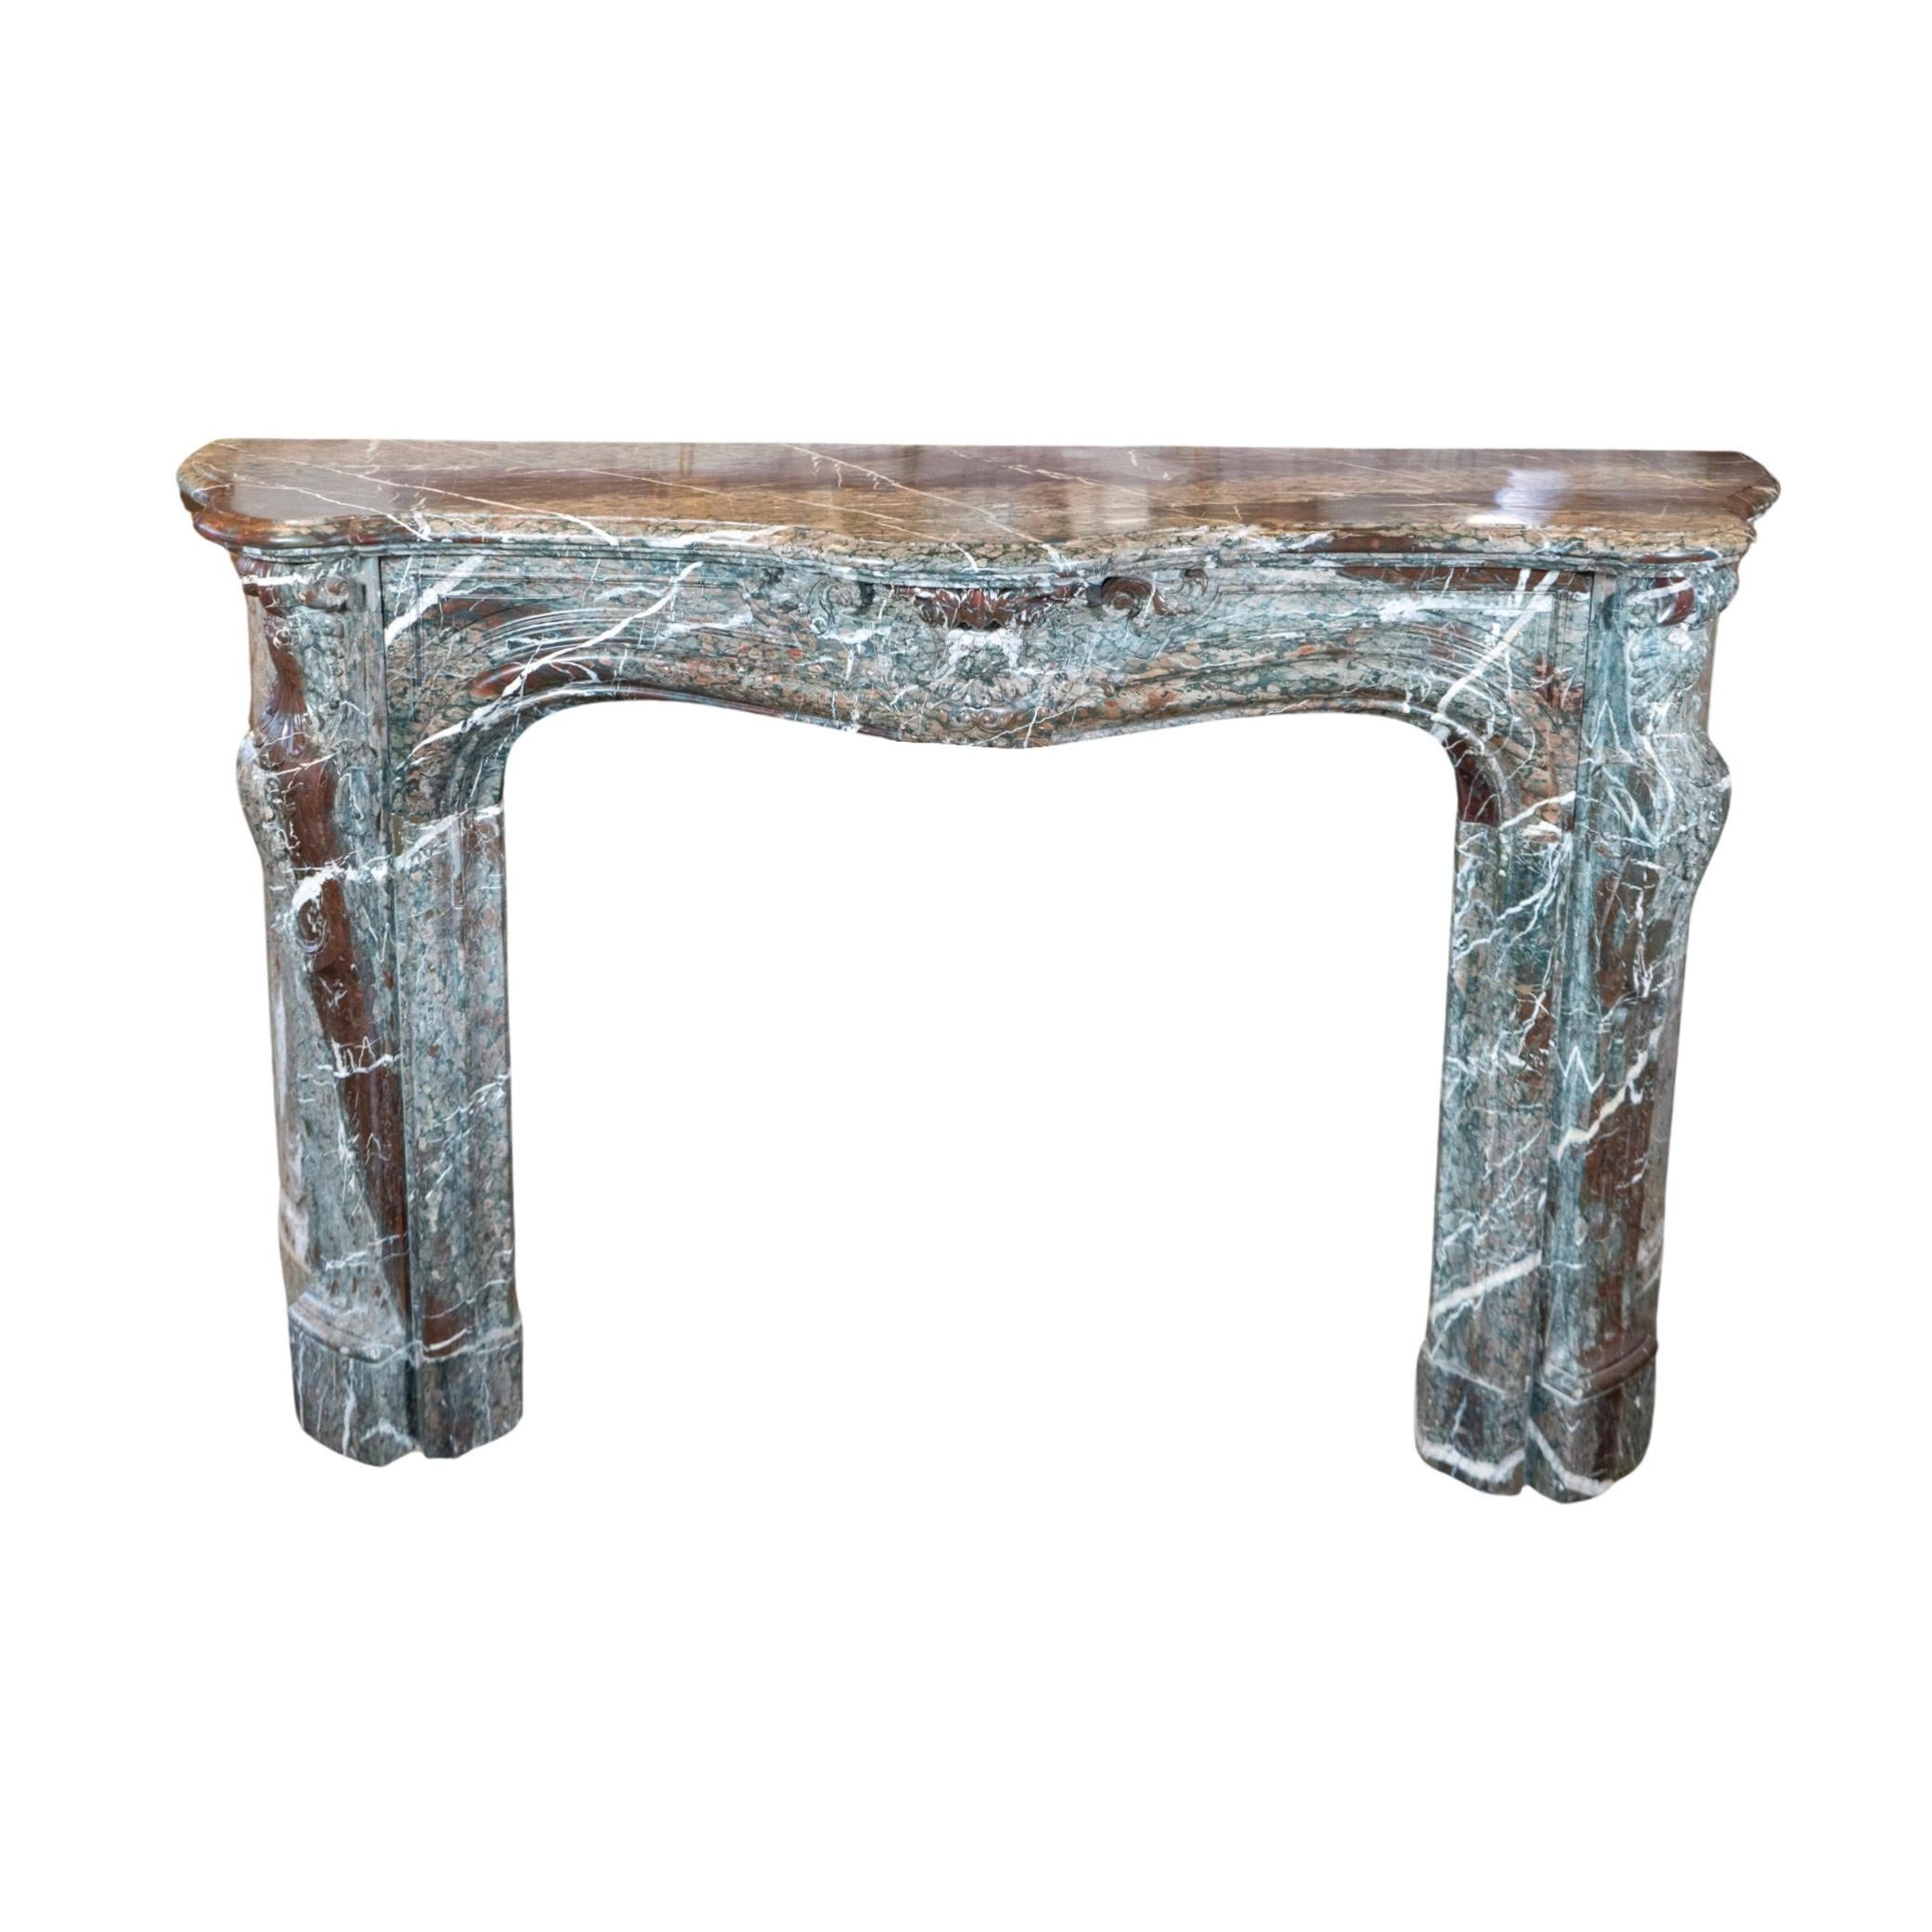 This French Grand Mix Campan Marble Mantel is a stunning and historical addition to any home. Handcrafted from a blend of Grand mix and Ribboned Campan marble originating from France in the 18th century, it adds a touch of elegance and class to any